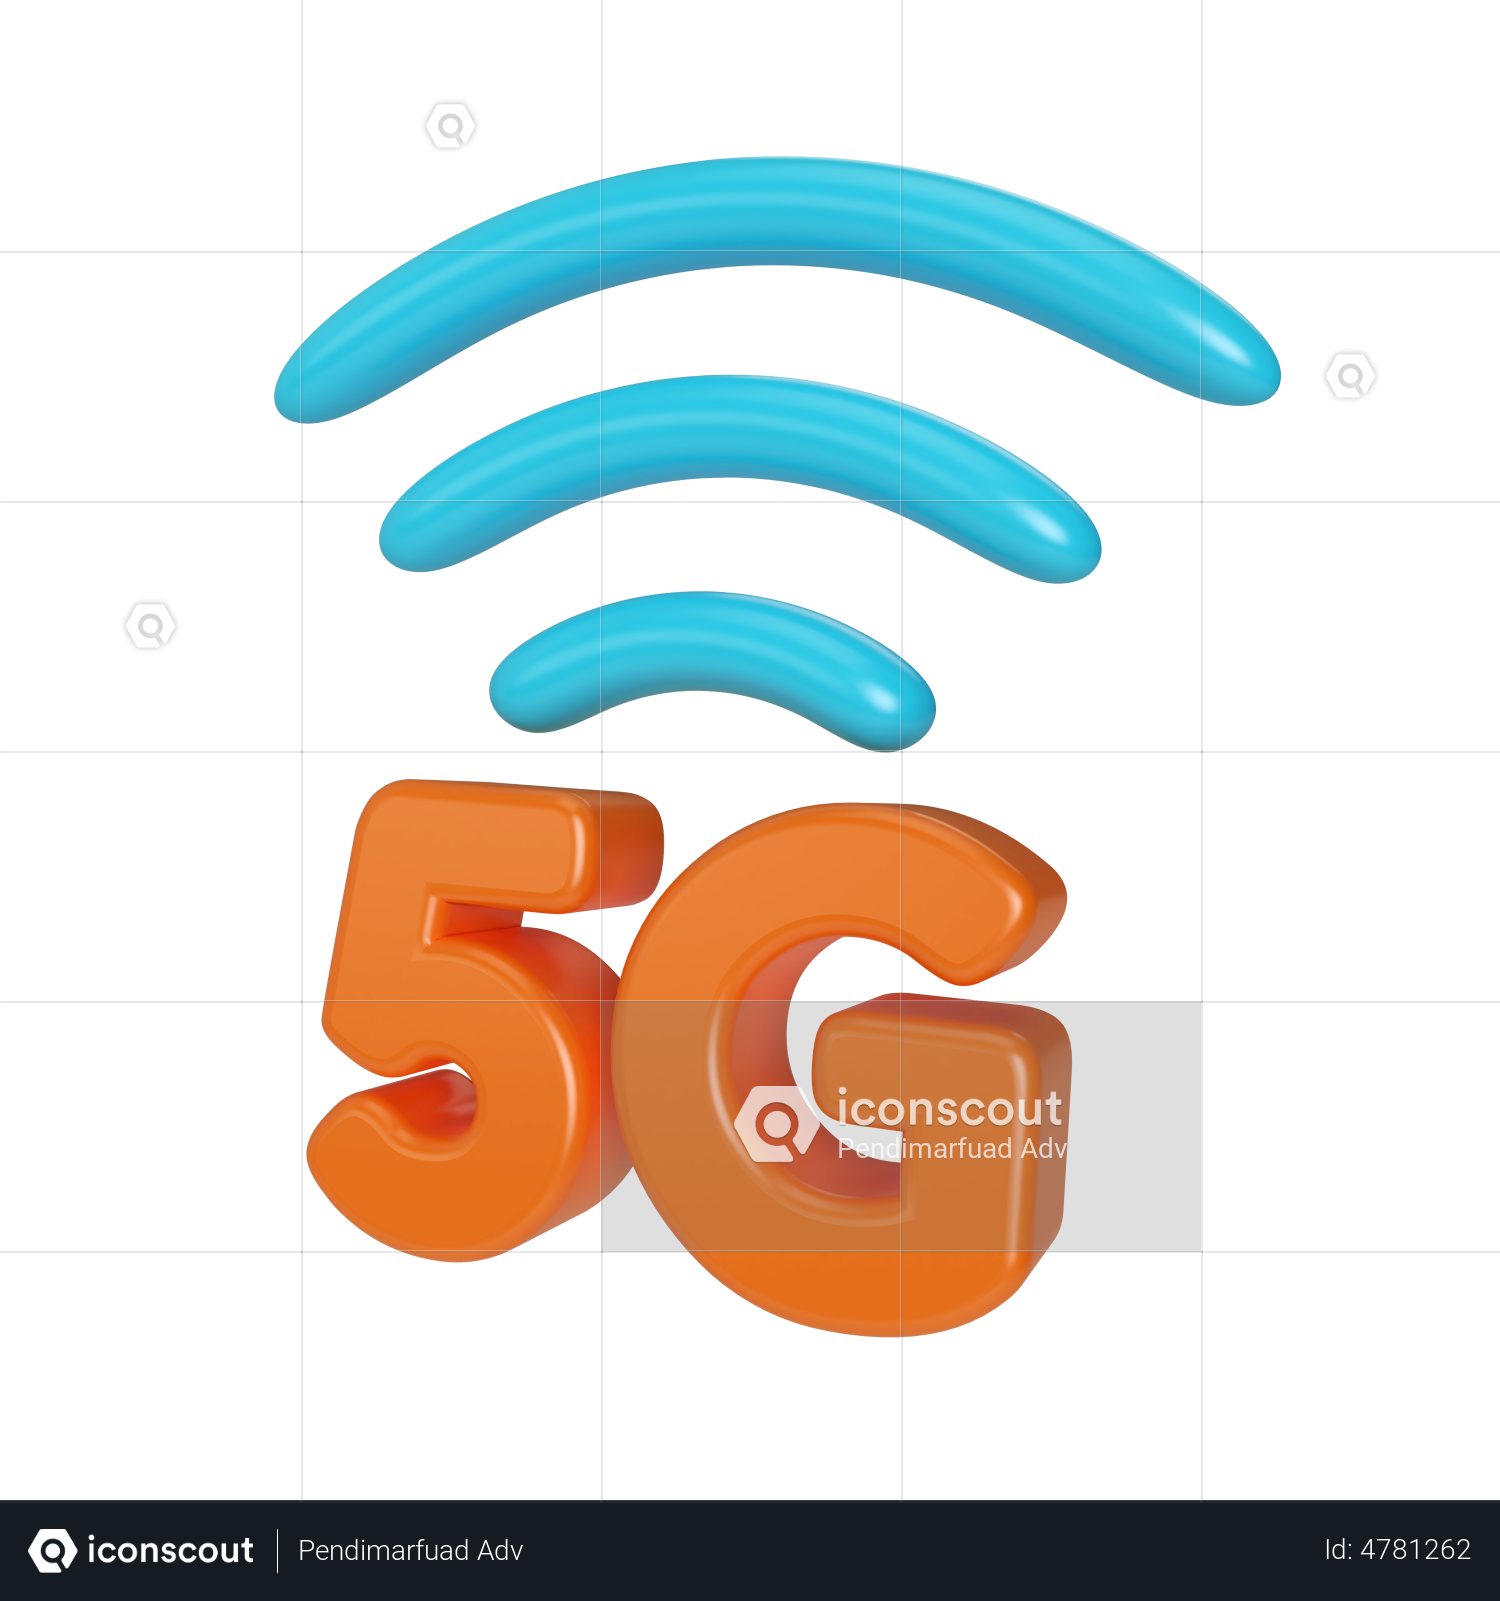 5g, Logo Vector, Art Vector, Light Vector PNG Hd Transparent Image And  Clipart Image For Free Download - Lovepik | 401306314